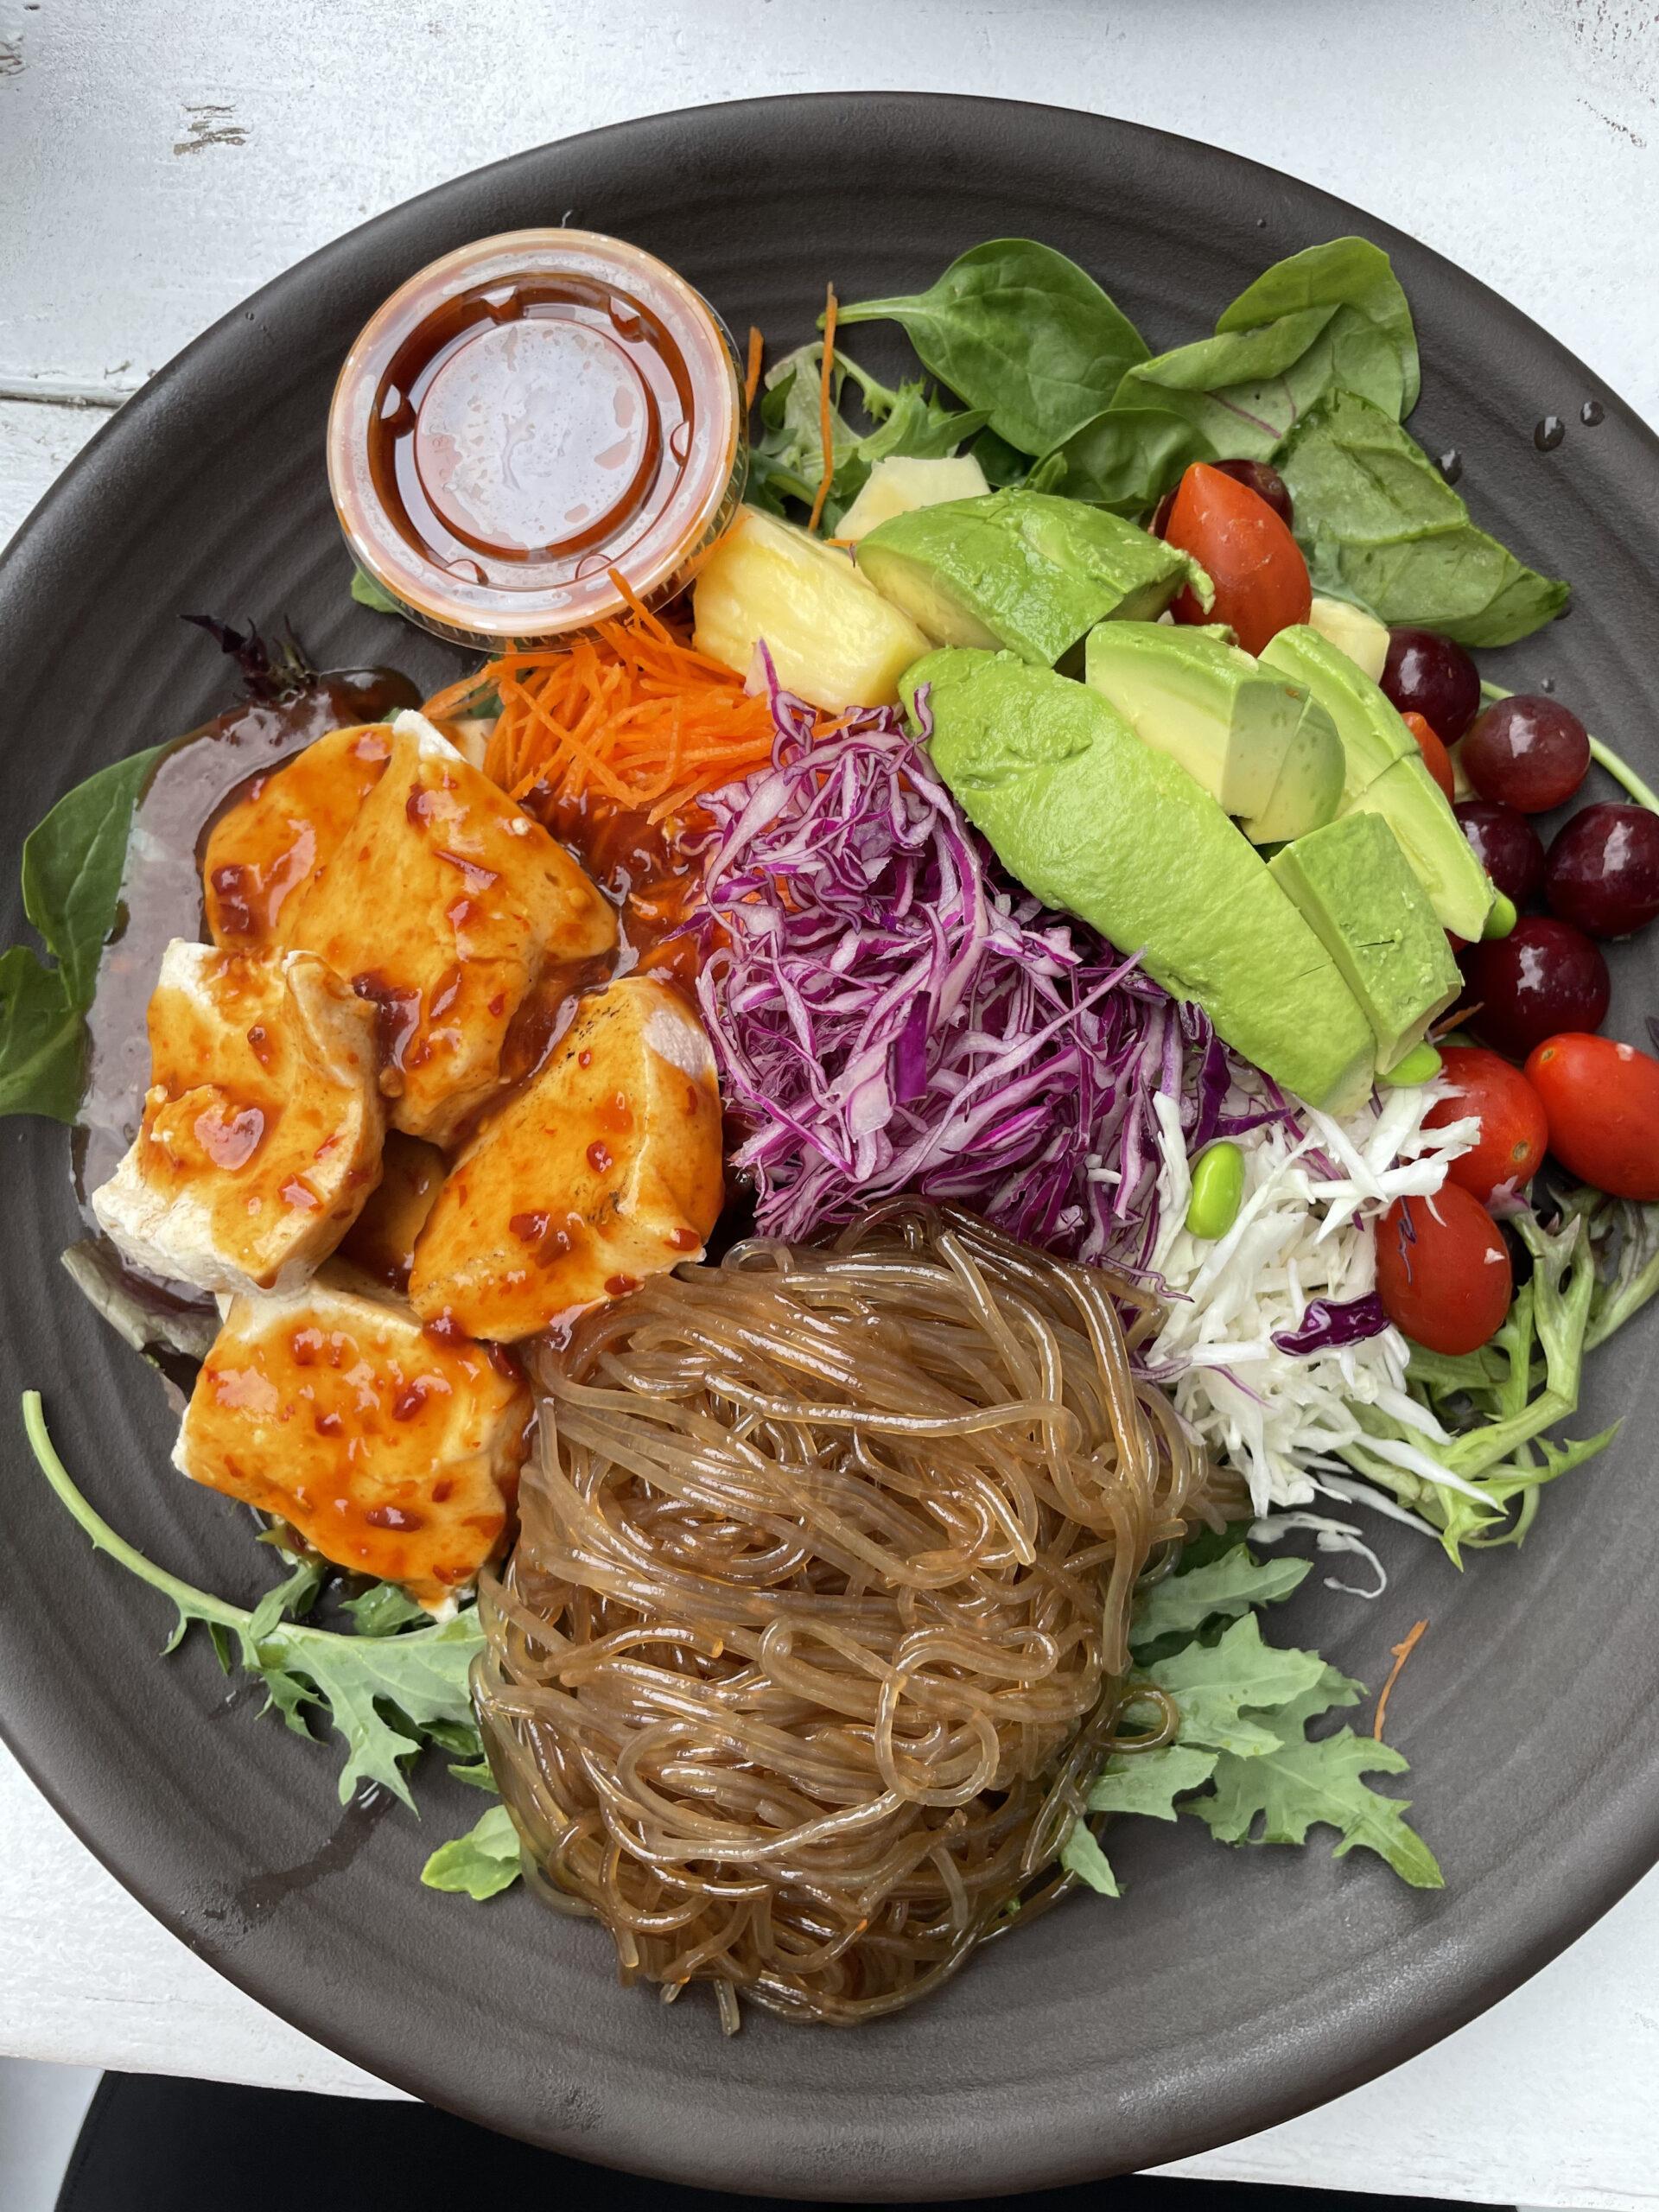 Image of Nancy's Sky Garden Spicy Tuna Rainbow Bowl, a healthy food option in Austin. The bowl is filled with fresh vegetables, sweet potato noodles and spicy tuna, making it a perfect meal for those looking for a nutritious and delicious meal in Austin.